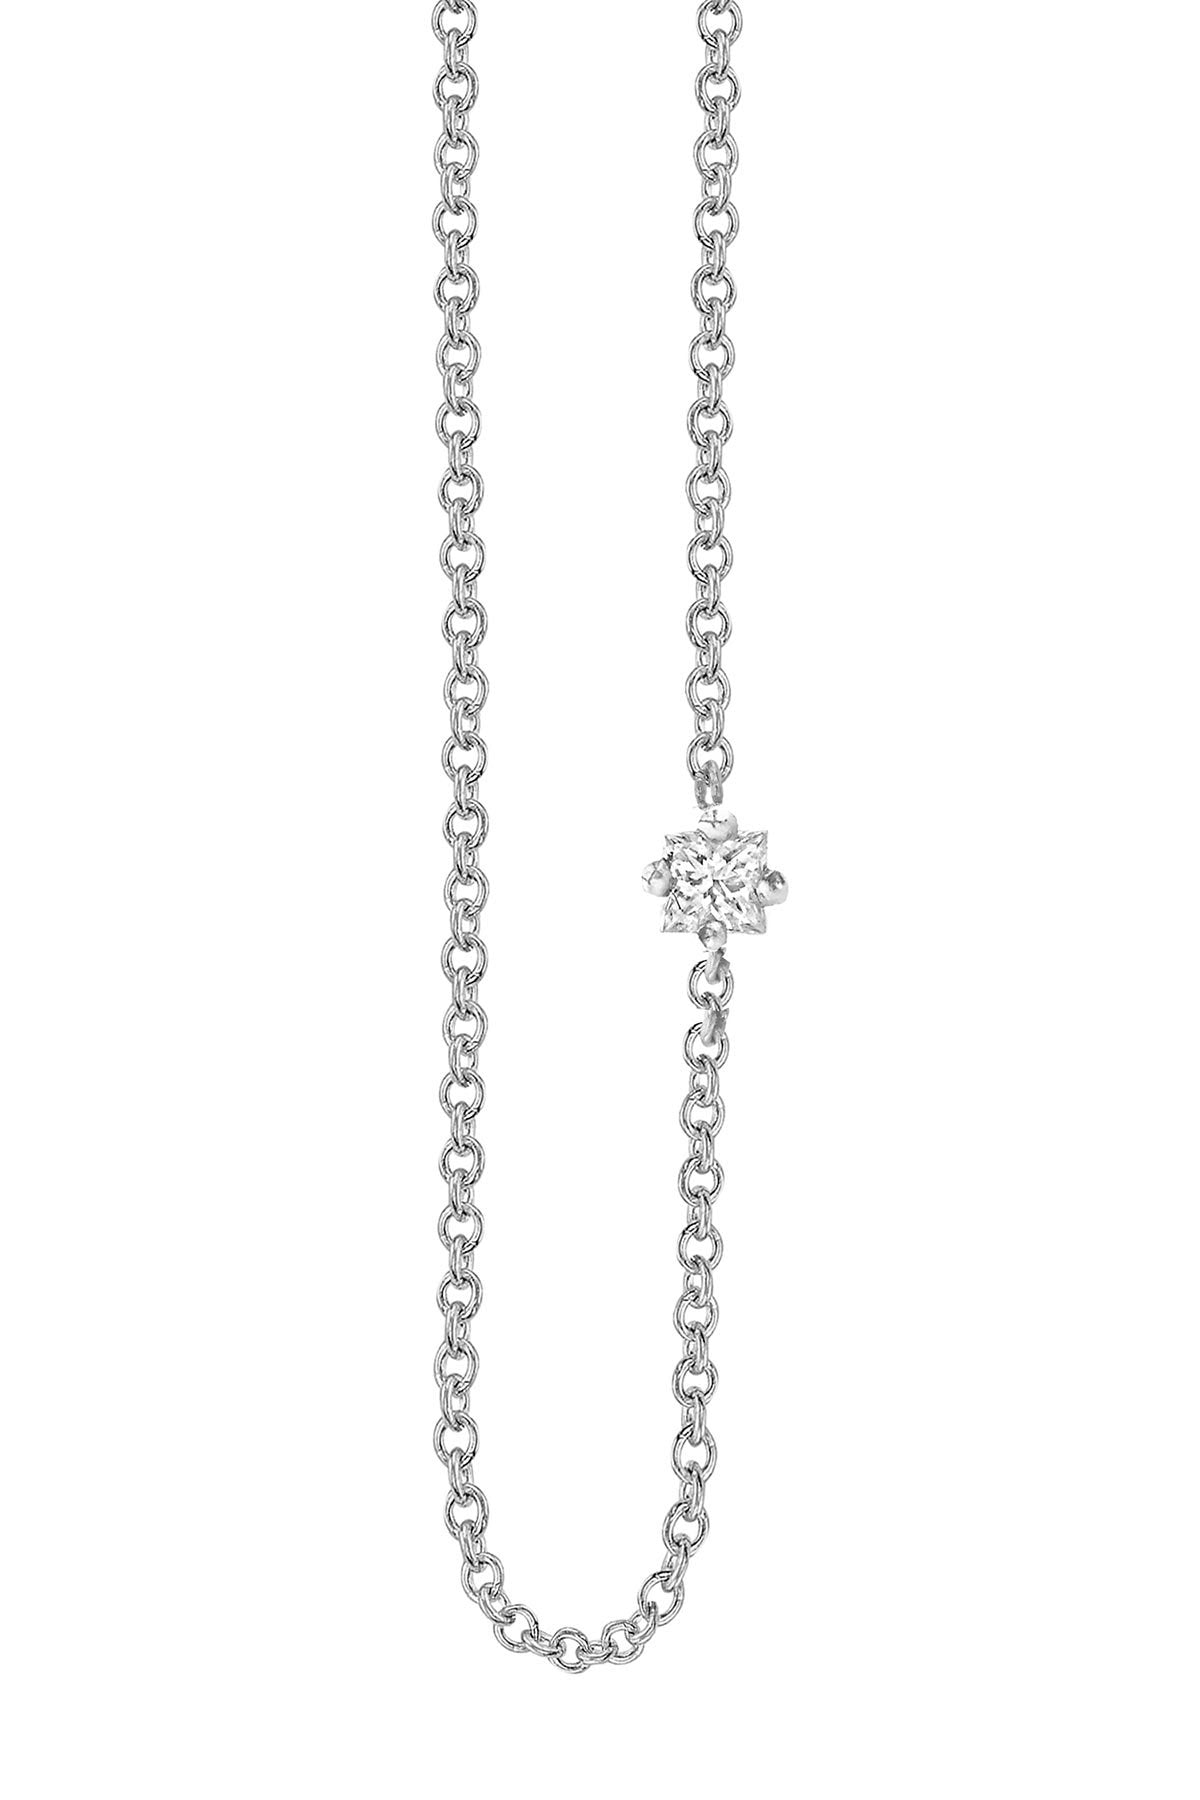   WHITE SAPPHIRE FLOATING NECKLACE BY SLOAN 